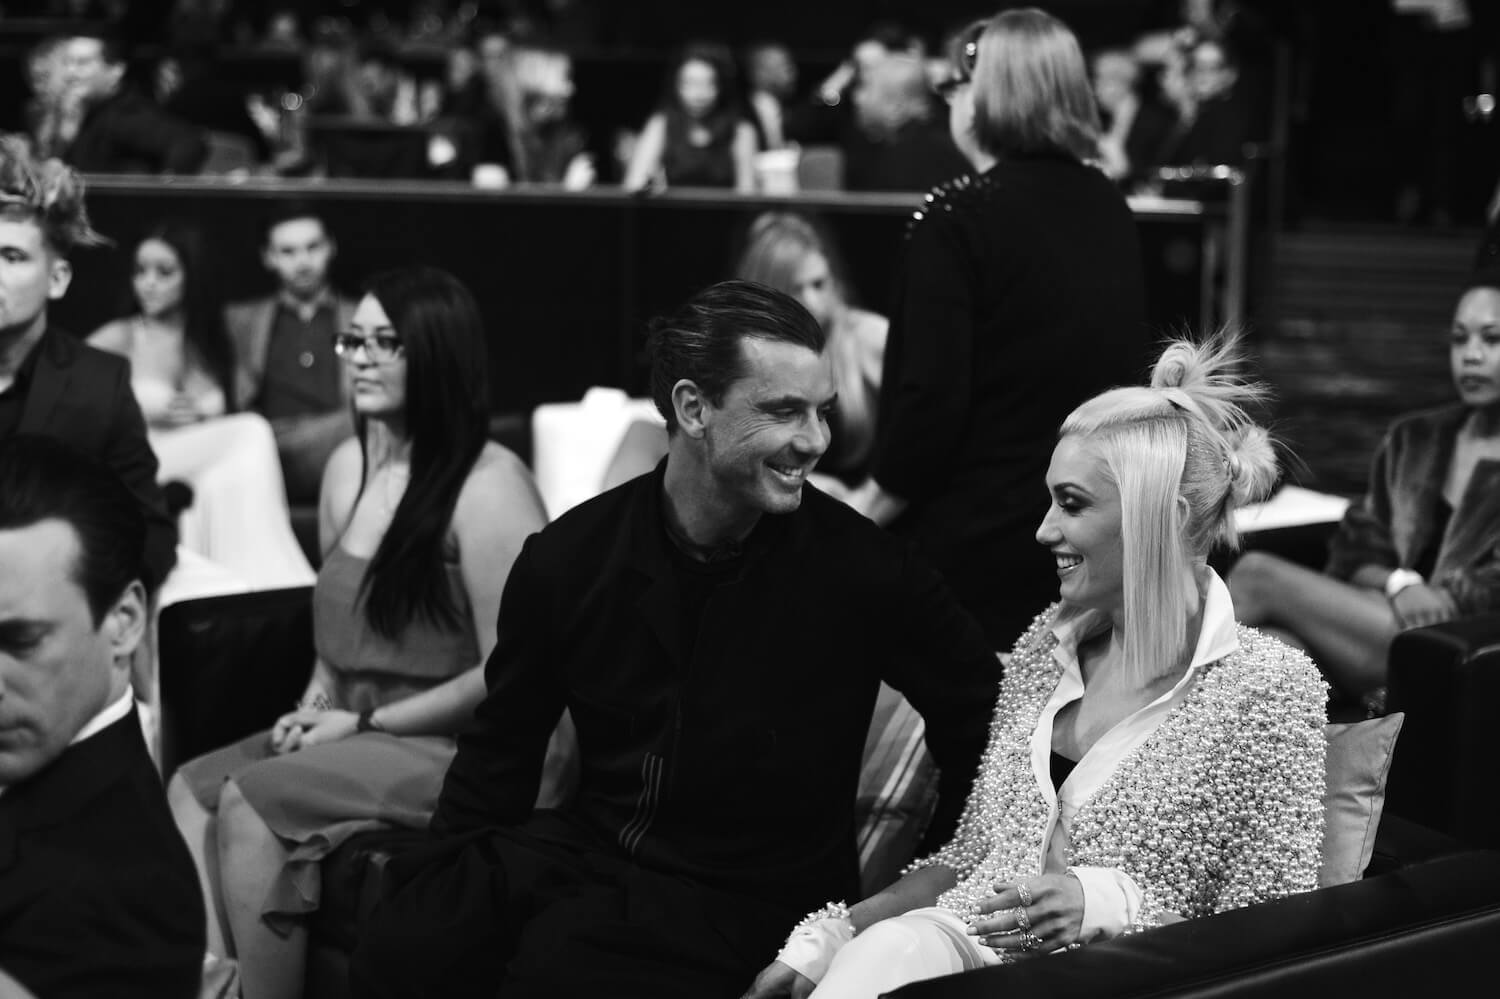 A black and white photo of Gavin Rossdale and 'The Voice' Season 24 star Gwen Stefani in 2014